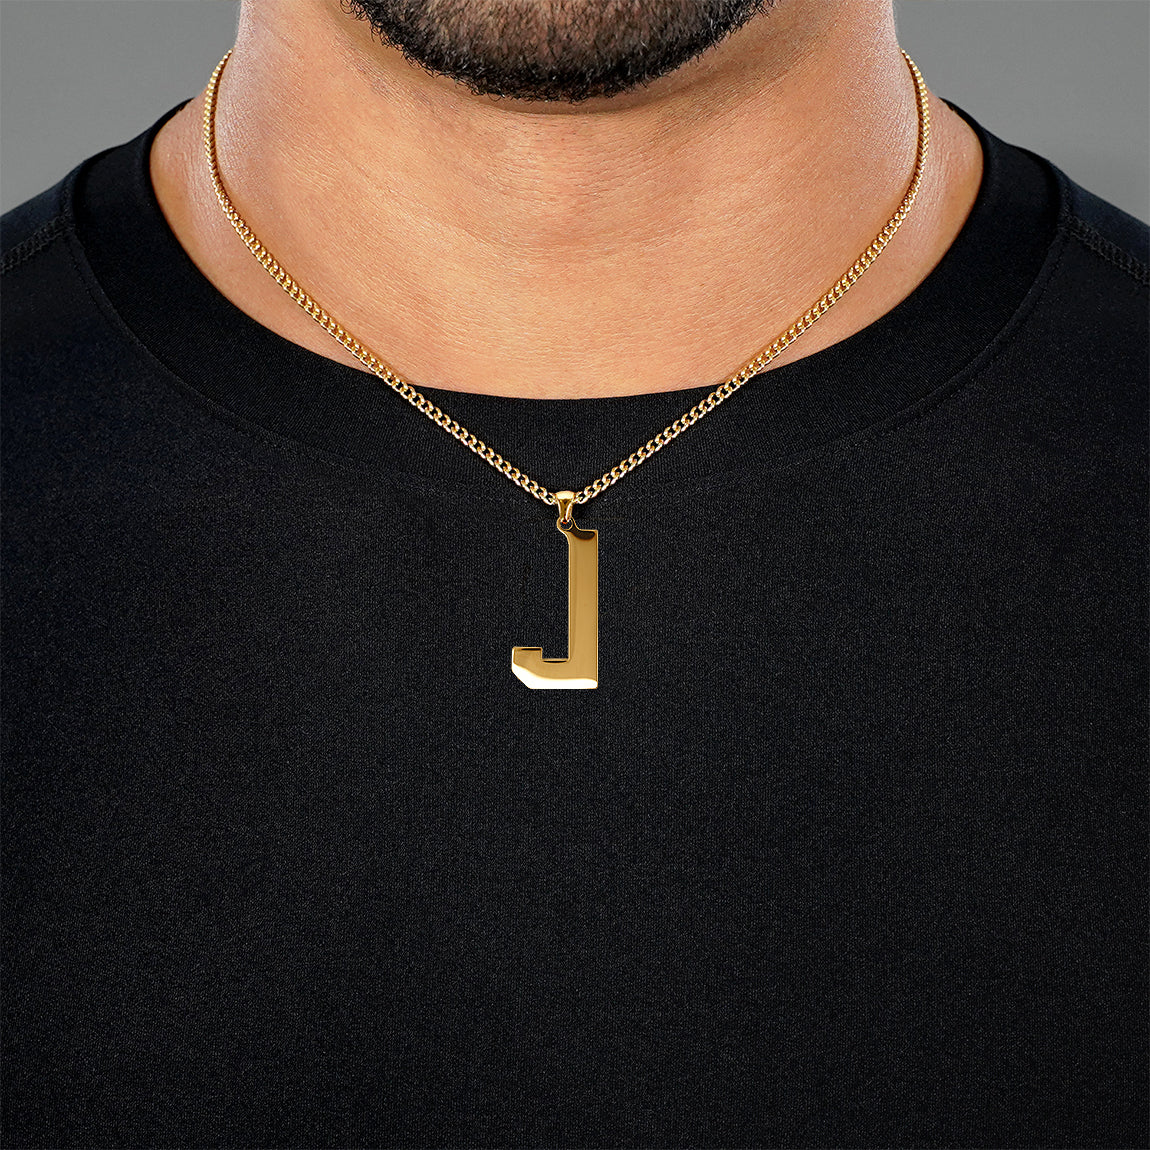 J Letter Pendant with Chain Necklace - Gold Plated Stainless Steel